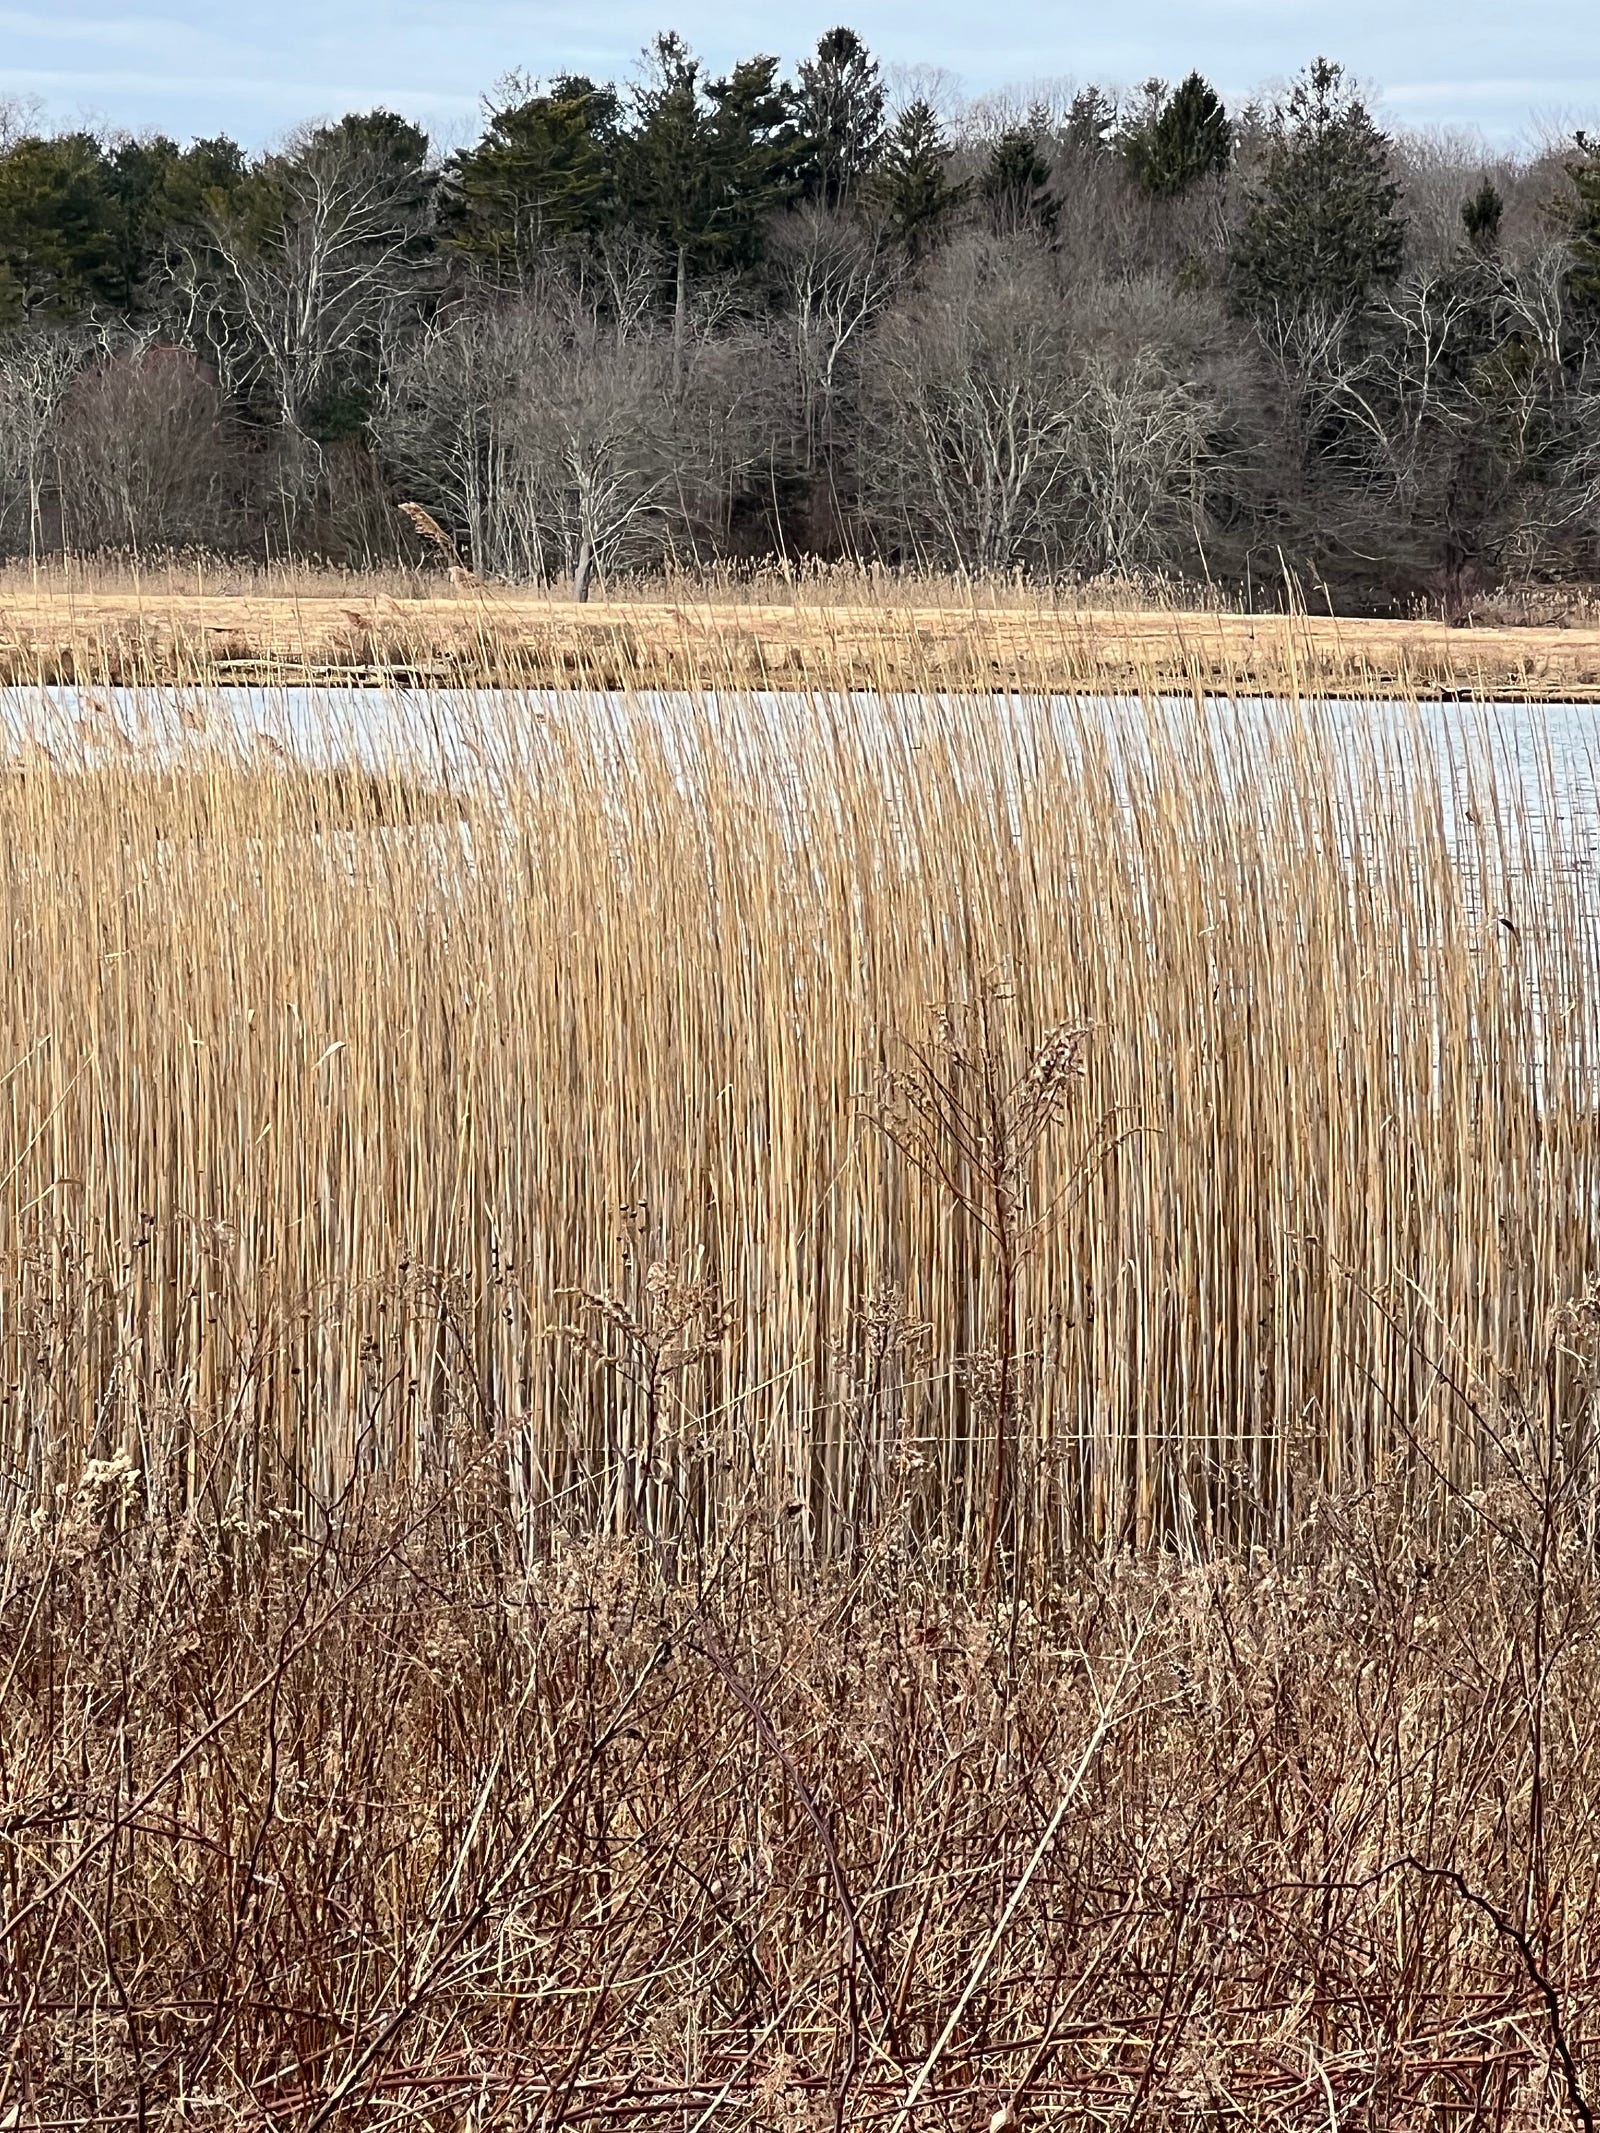 Photo of a tidal marsh at Harkness Memorial State Park in Waterford, CT along Long Island Sound. This winter photo shows a strong vertical stand of tall grasses through which the tidal marsh can be seen, along with the scrub brushes and conifers that make up the tree line on the far shore. Photo by Ron Steed